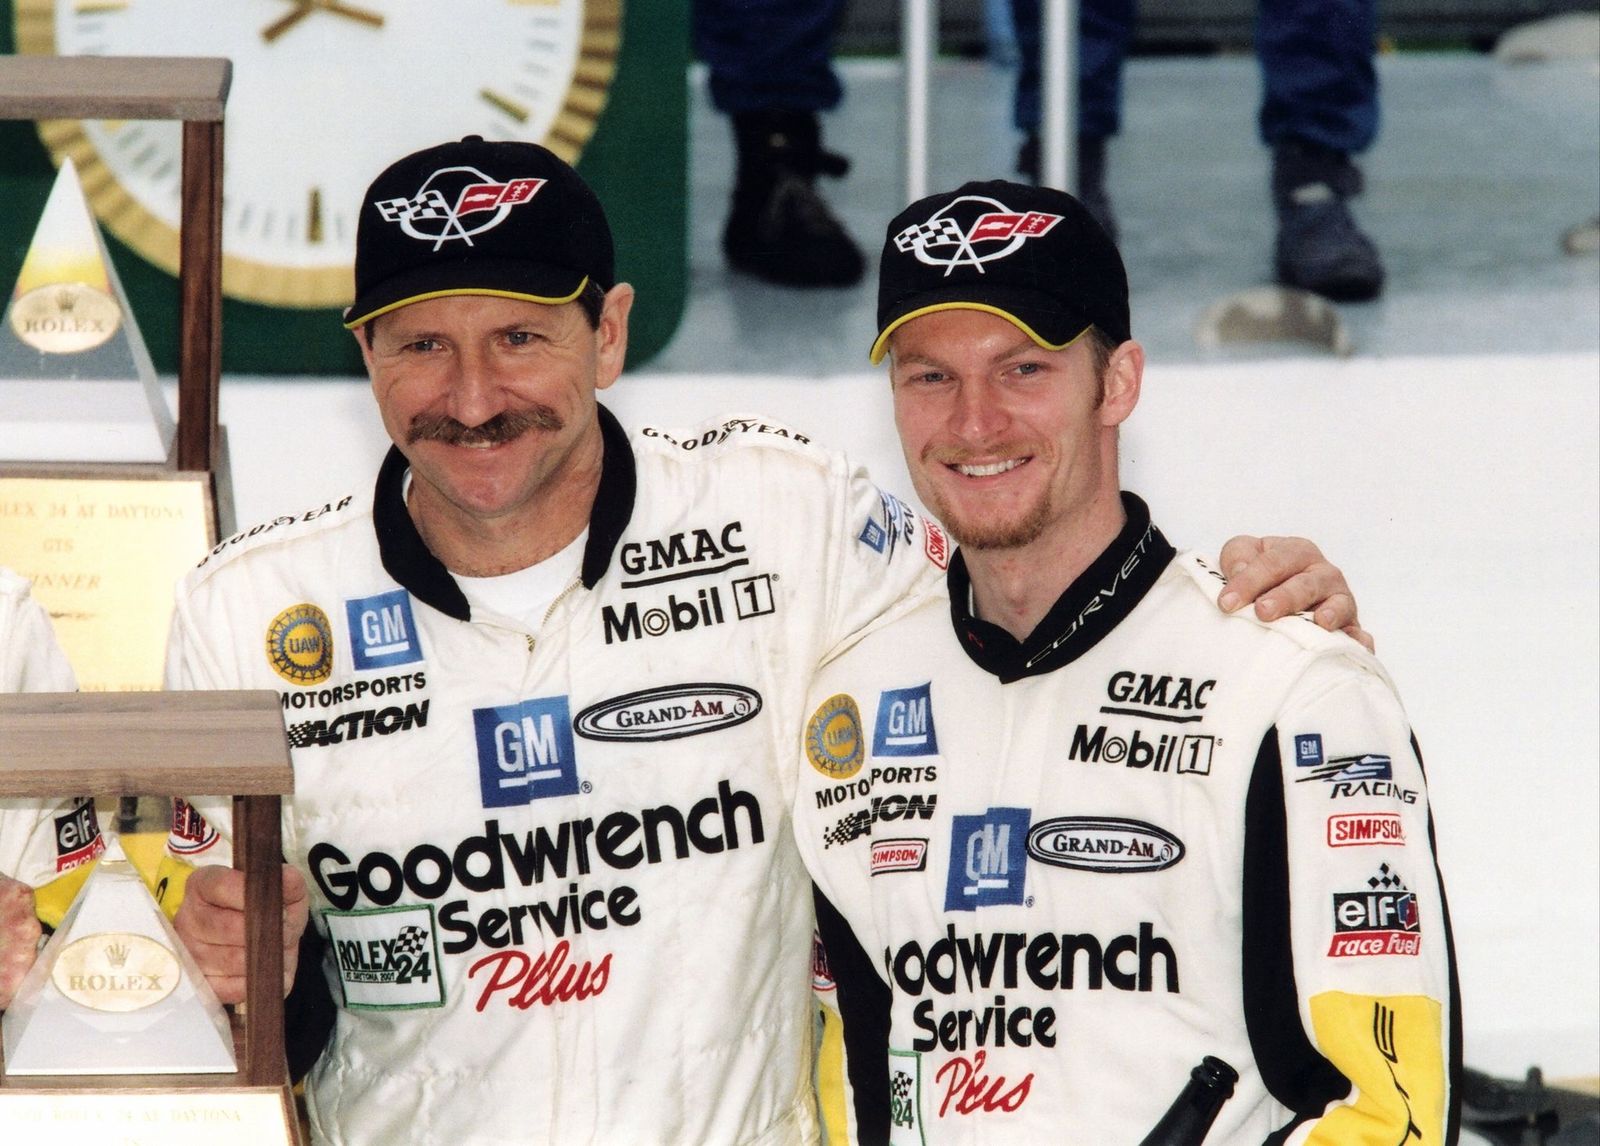 Dale Earnhardt Sr. and Dale Earnhard, Jr. pose at the raceway in Daytona Beach, Florida on February 4, 2001 | Photo: ISC Archives/CQ-Roll Call Group/Getty Images